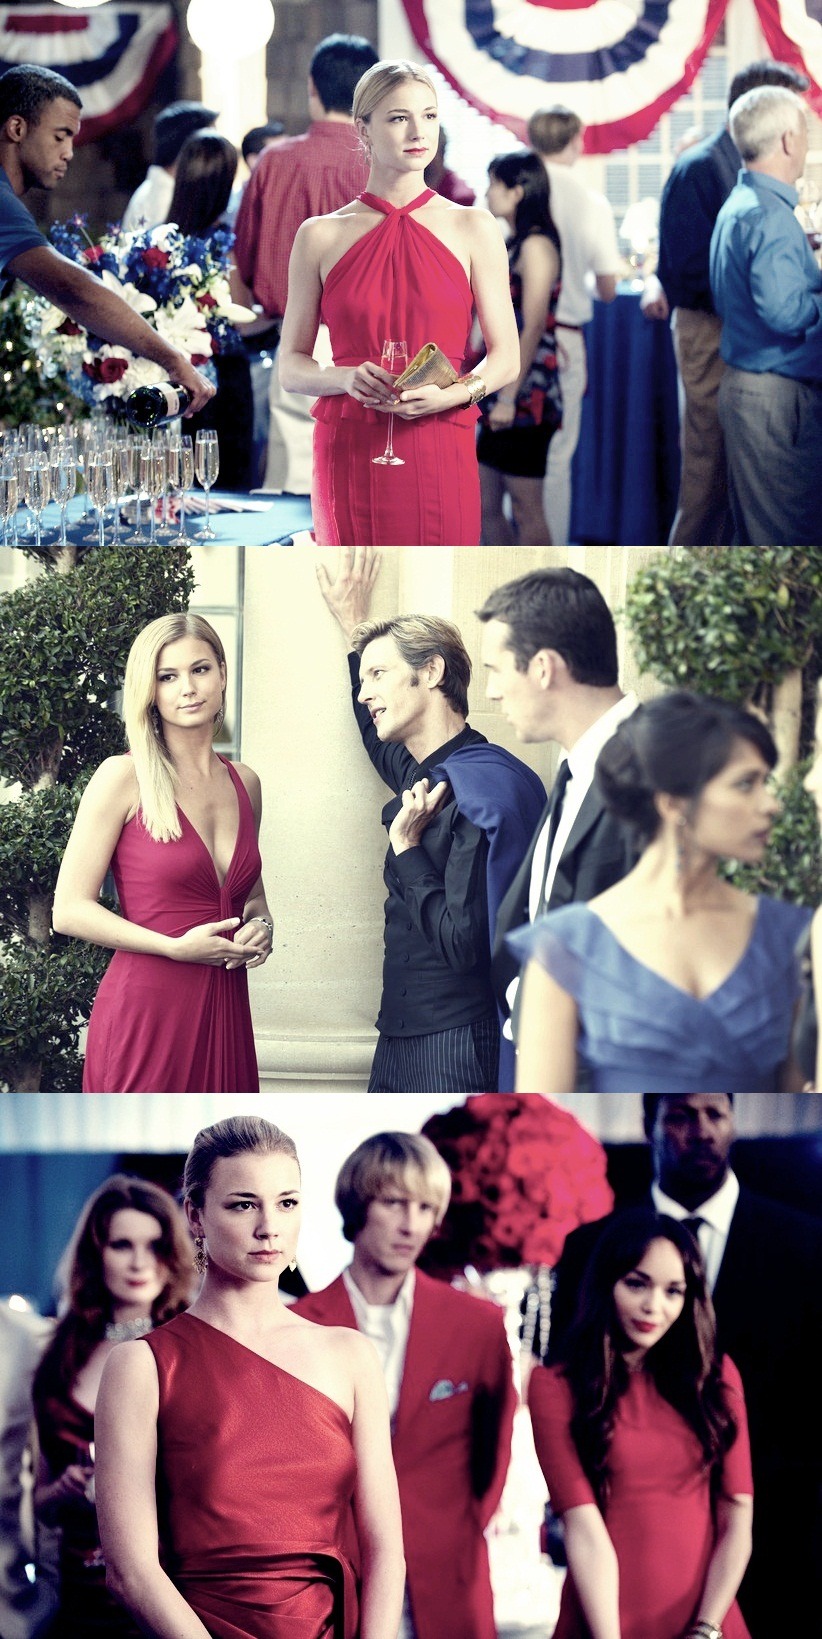 rayssamalabaris-blog:   Emily Thorne is a woman on a mission in her red dress.  